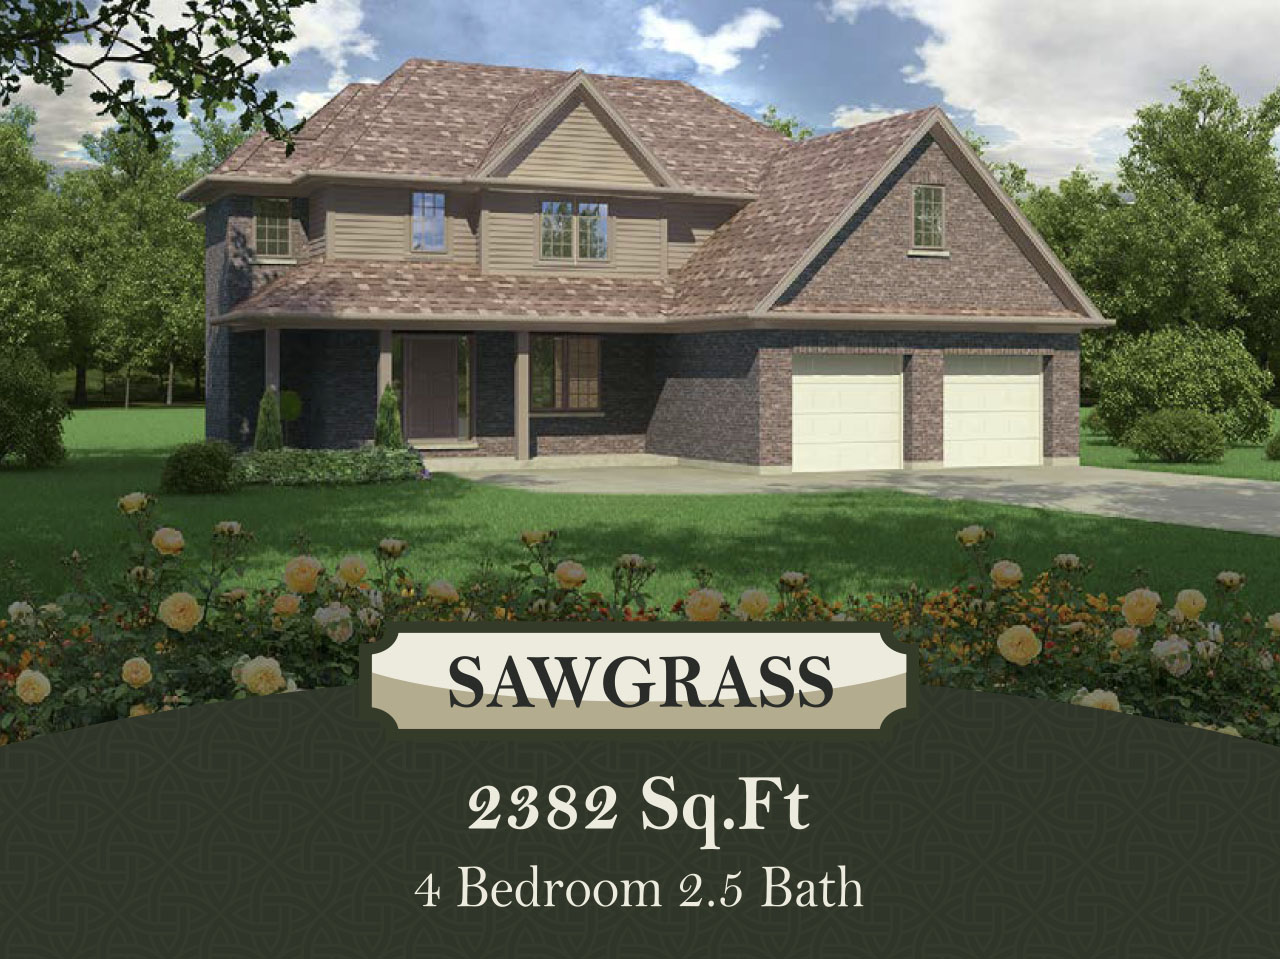 omalley-homes-sawgrass-rendering